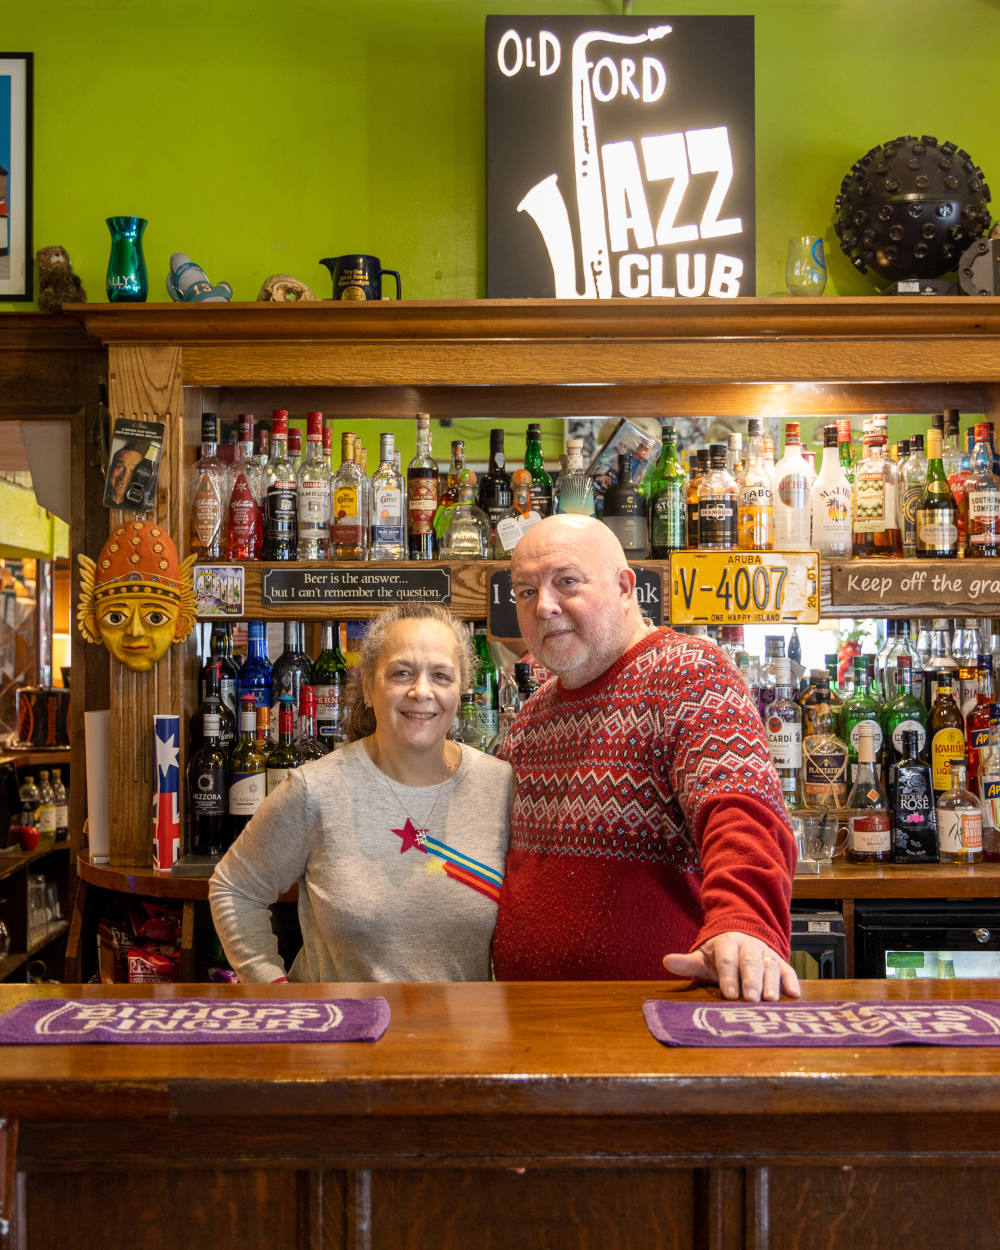 Under the Old Ford Jazz Club sign, Frankie and Leslie say goodbye to The Eleanor Arms pub.